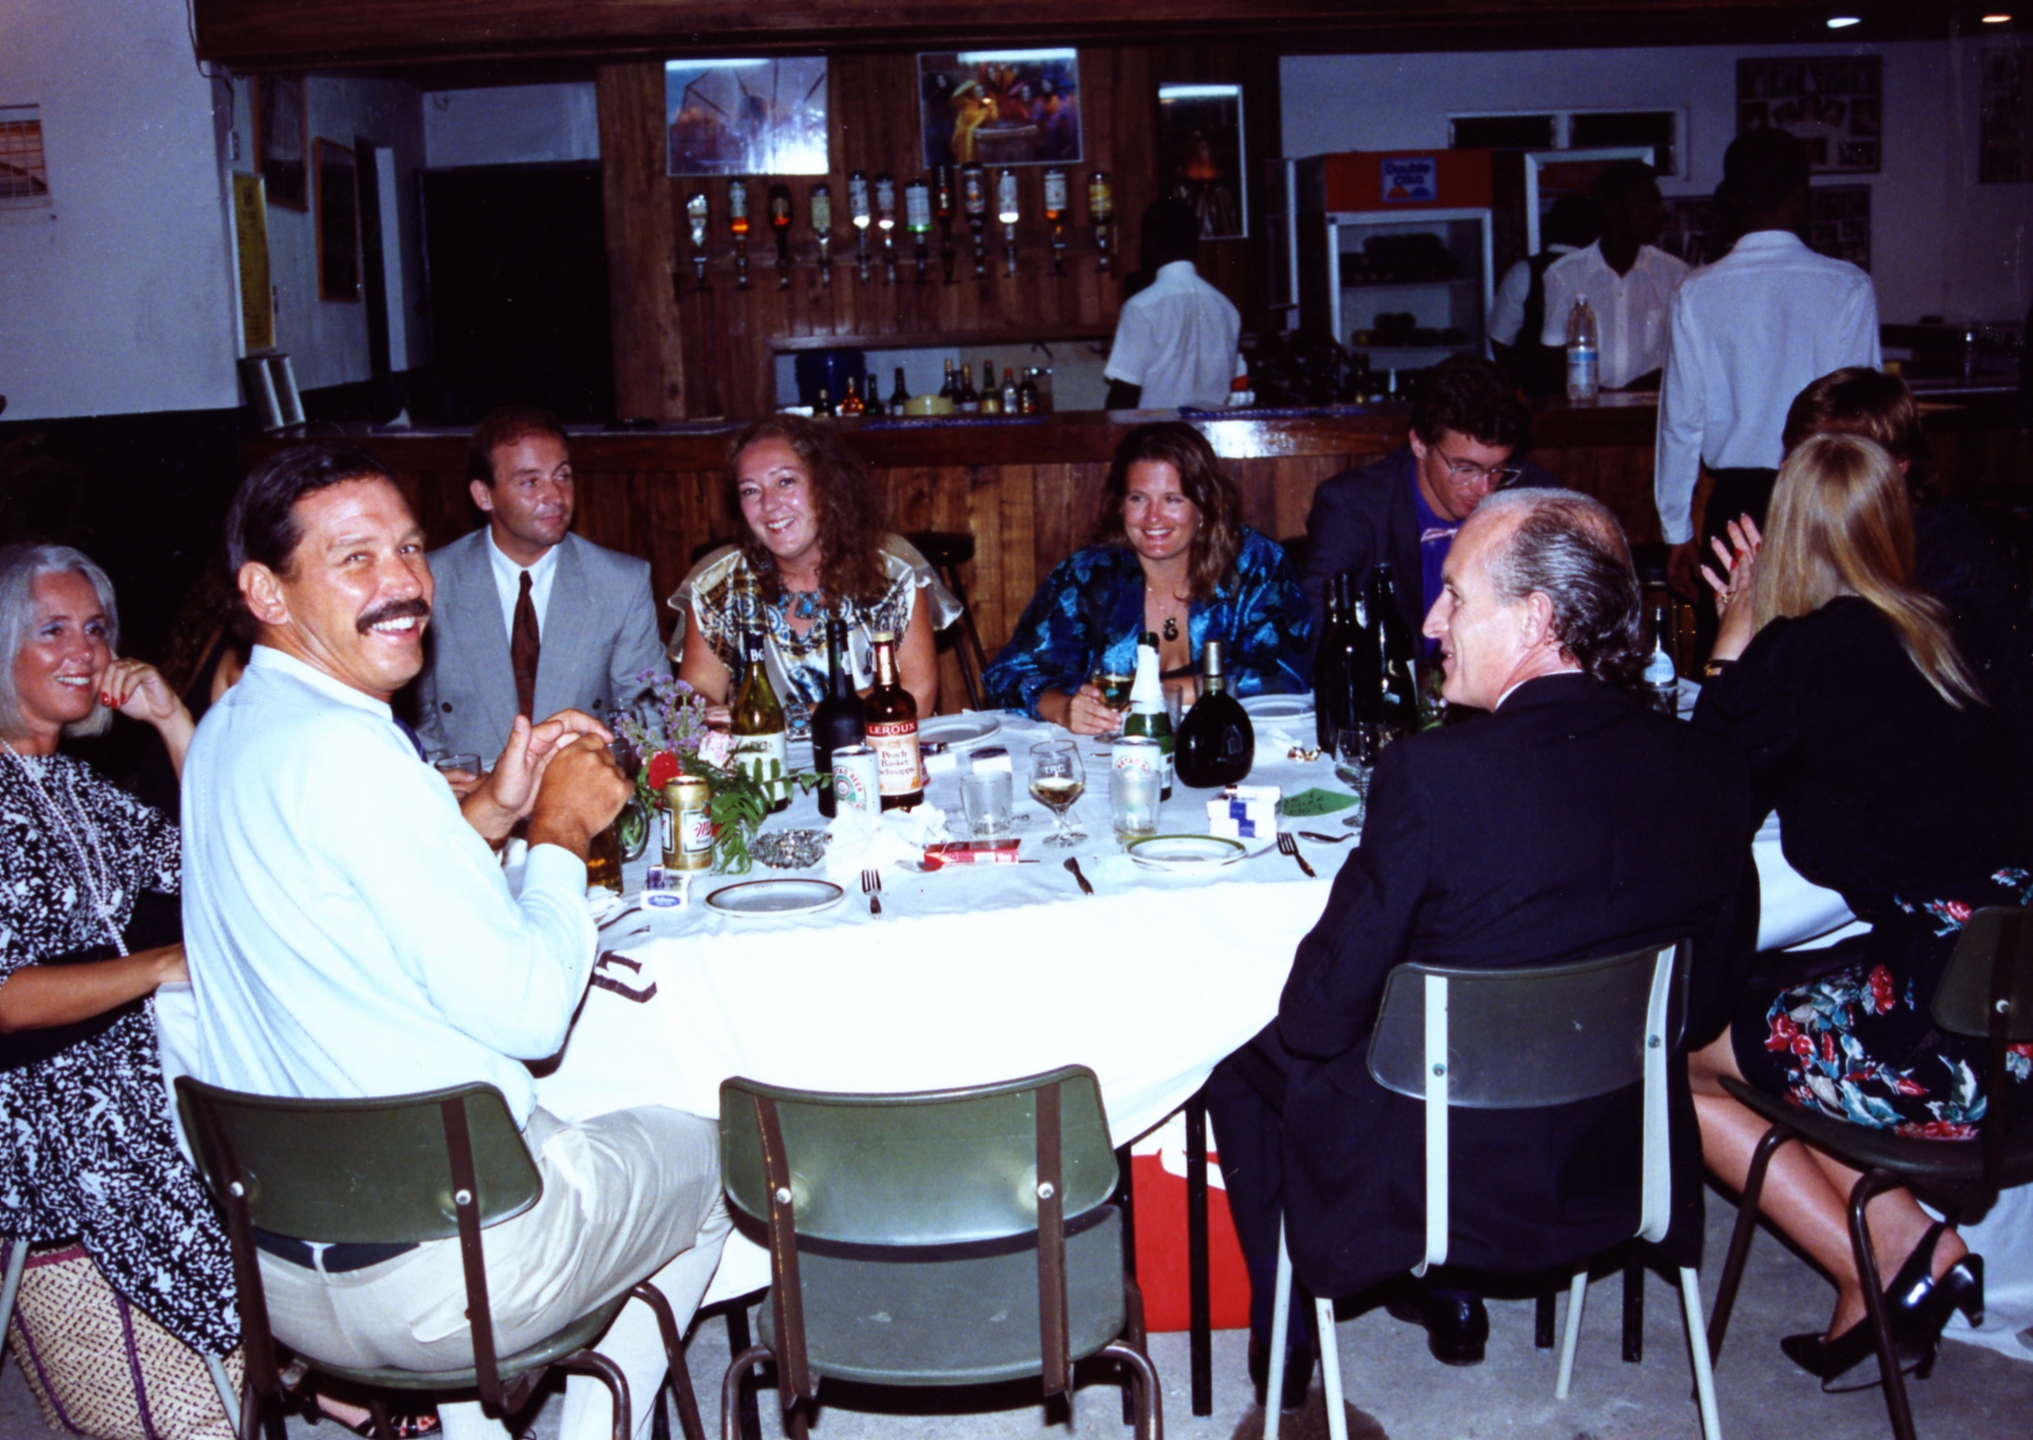 several people sitting around a table having wine